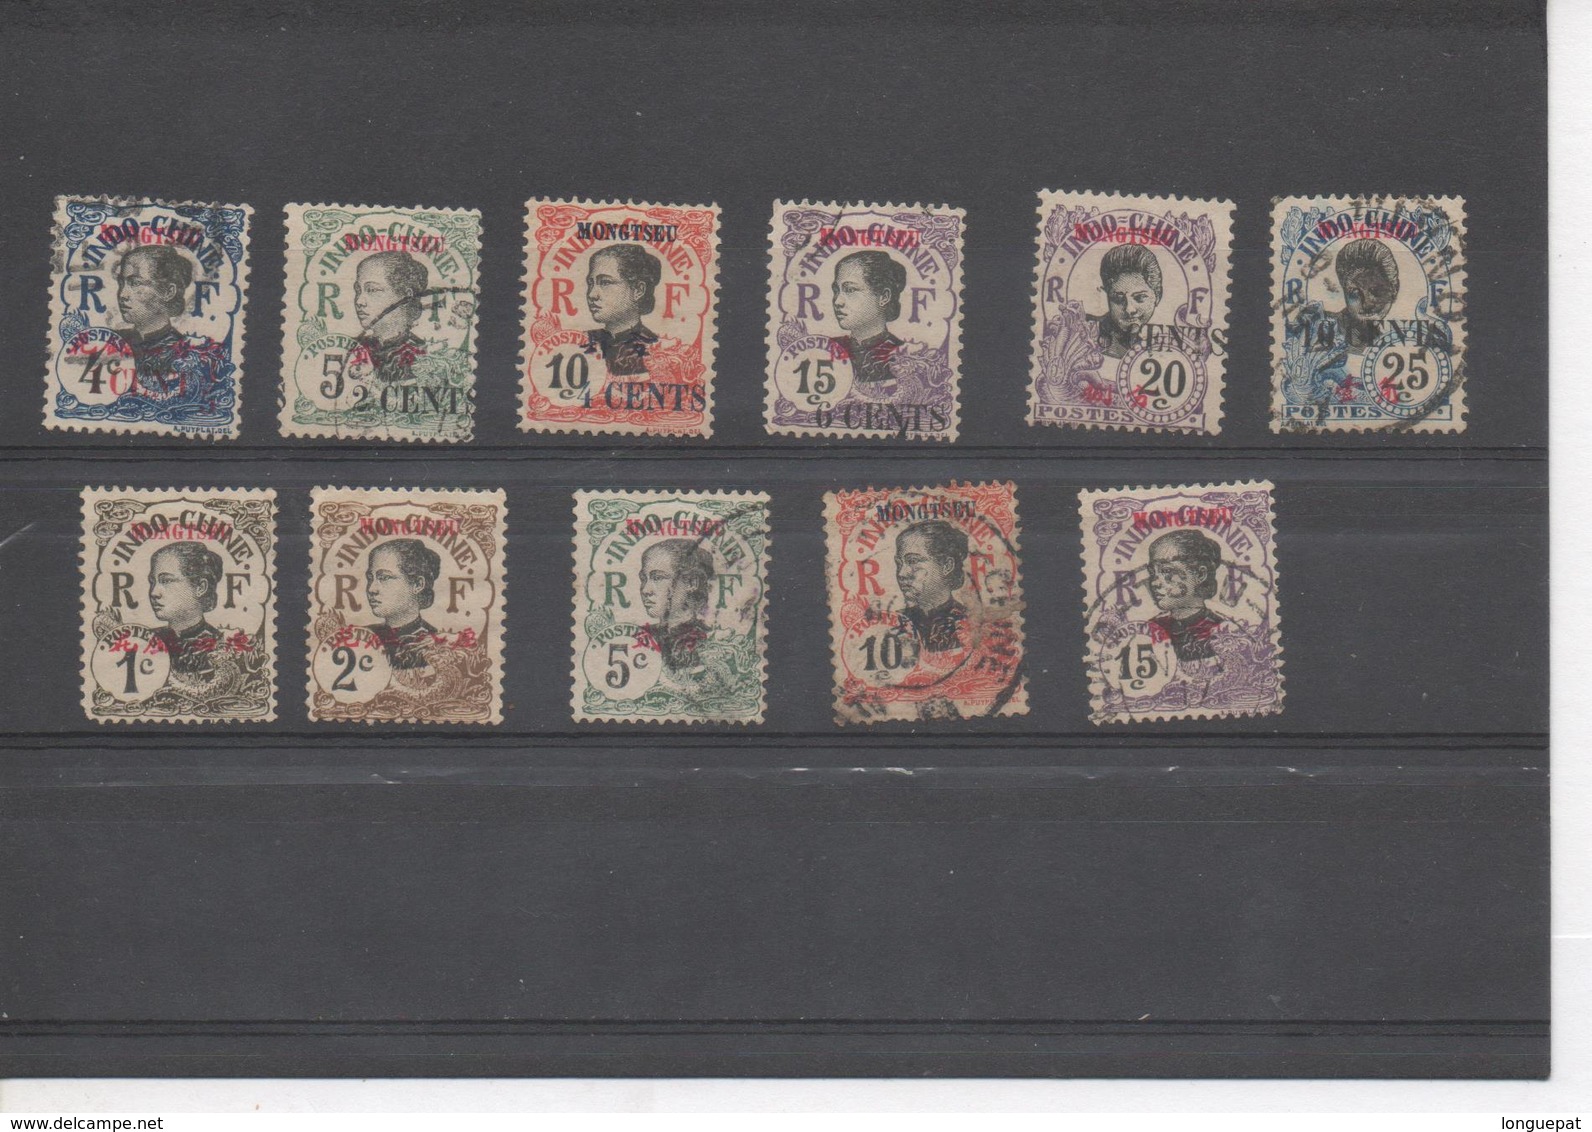 MONG-TZEU  - Timbres D'Indochine Surchargés "MONG-TZEU",- Anamite Et Cambodgienne - Used Stamps